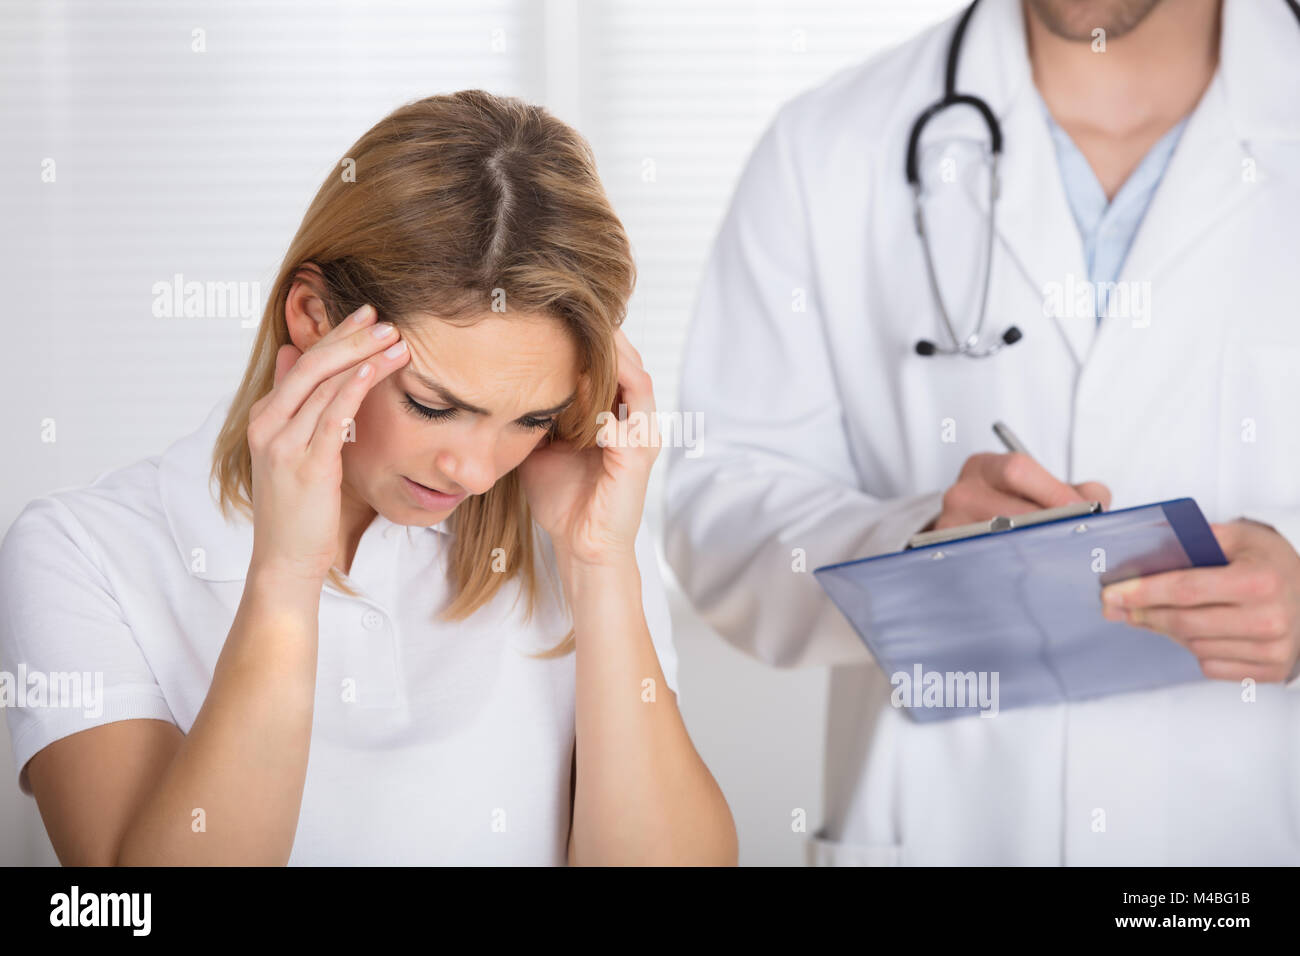 Female Patient With Headache In A Clinic Stock Photo